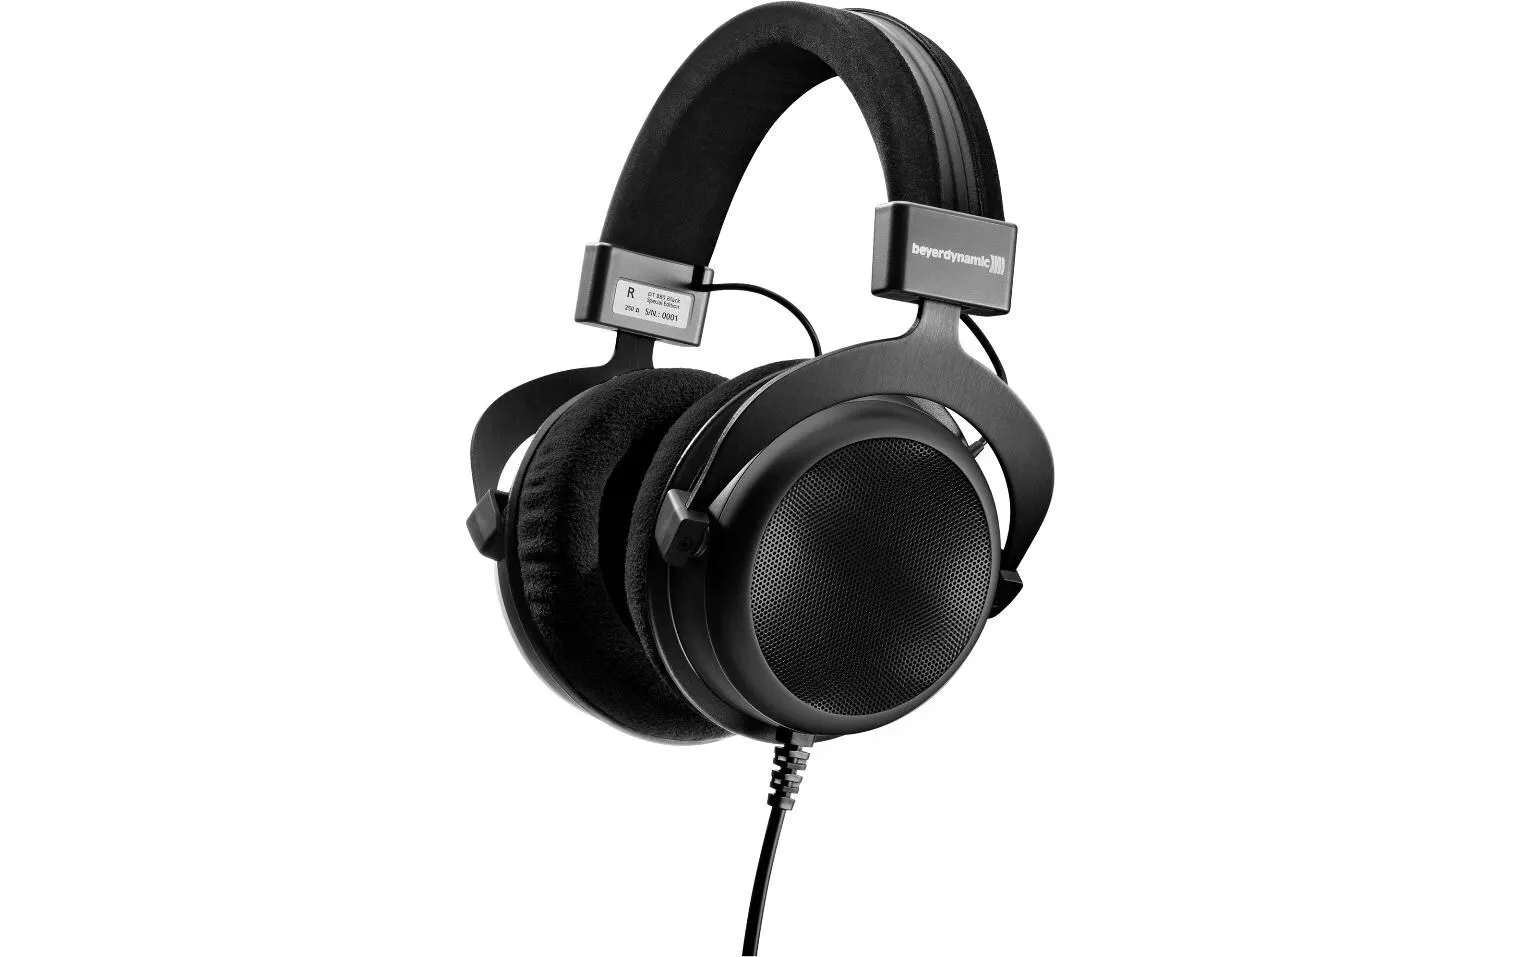 Casques supra-auriculaires DT 880 Black Edition 250 Ω